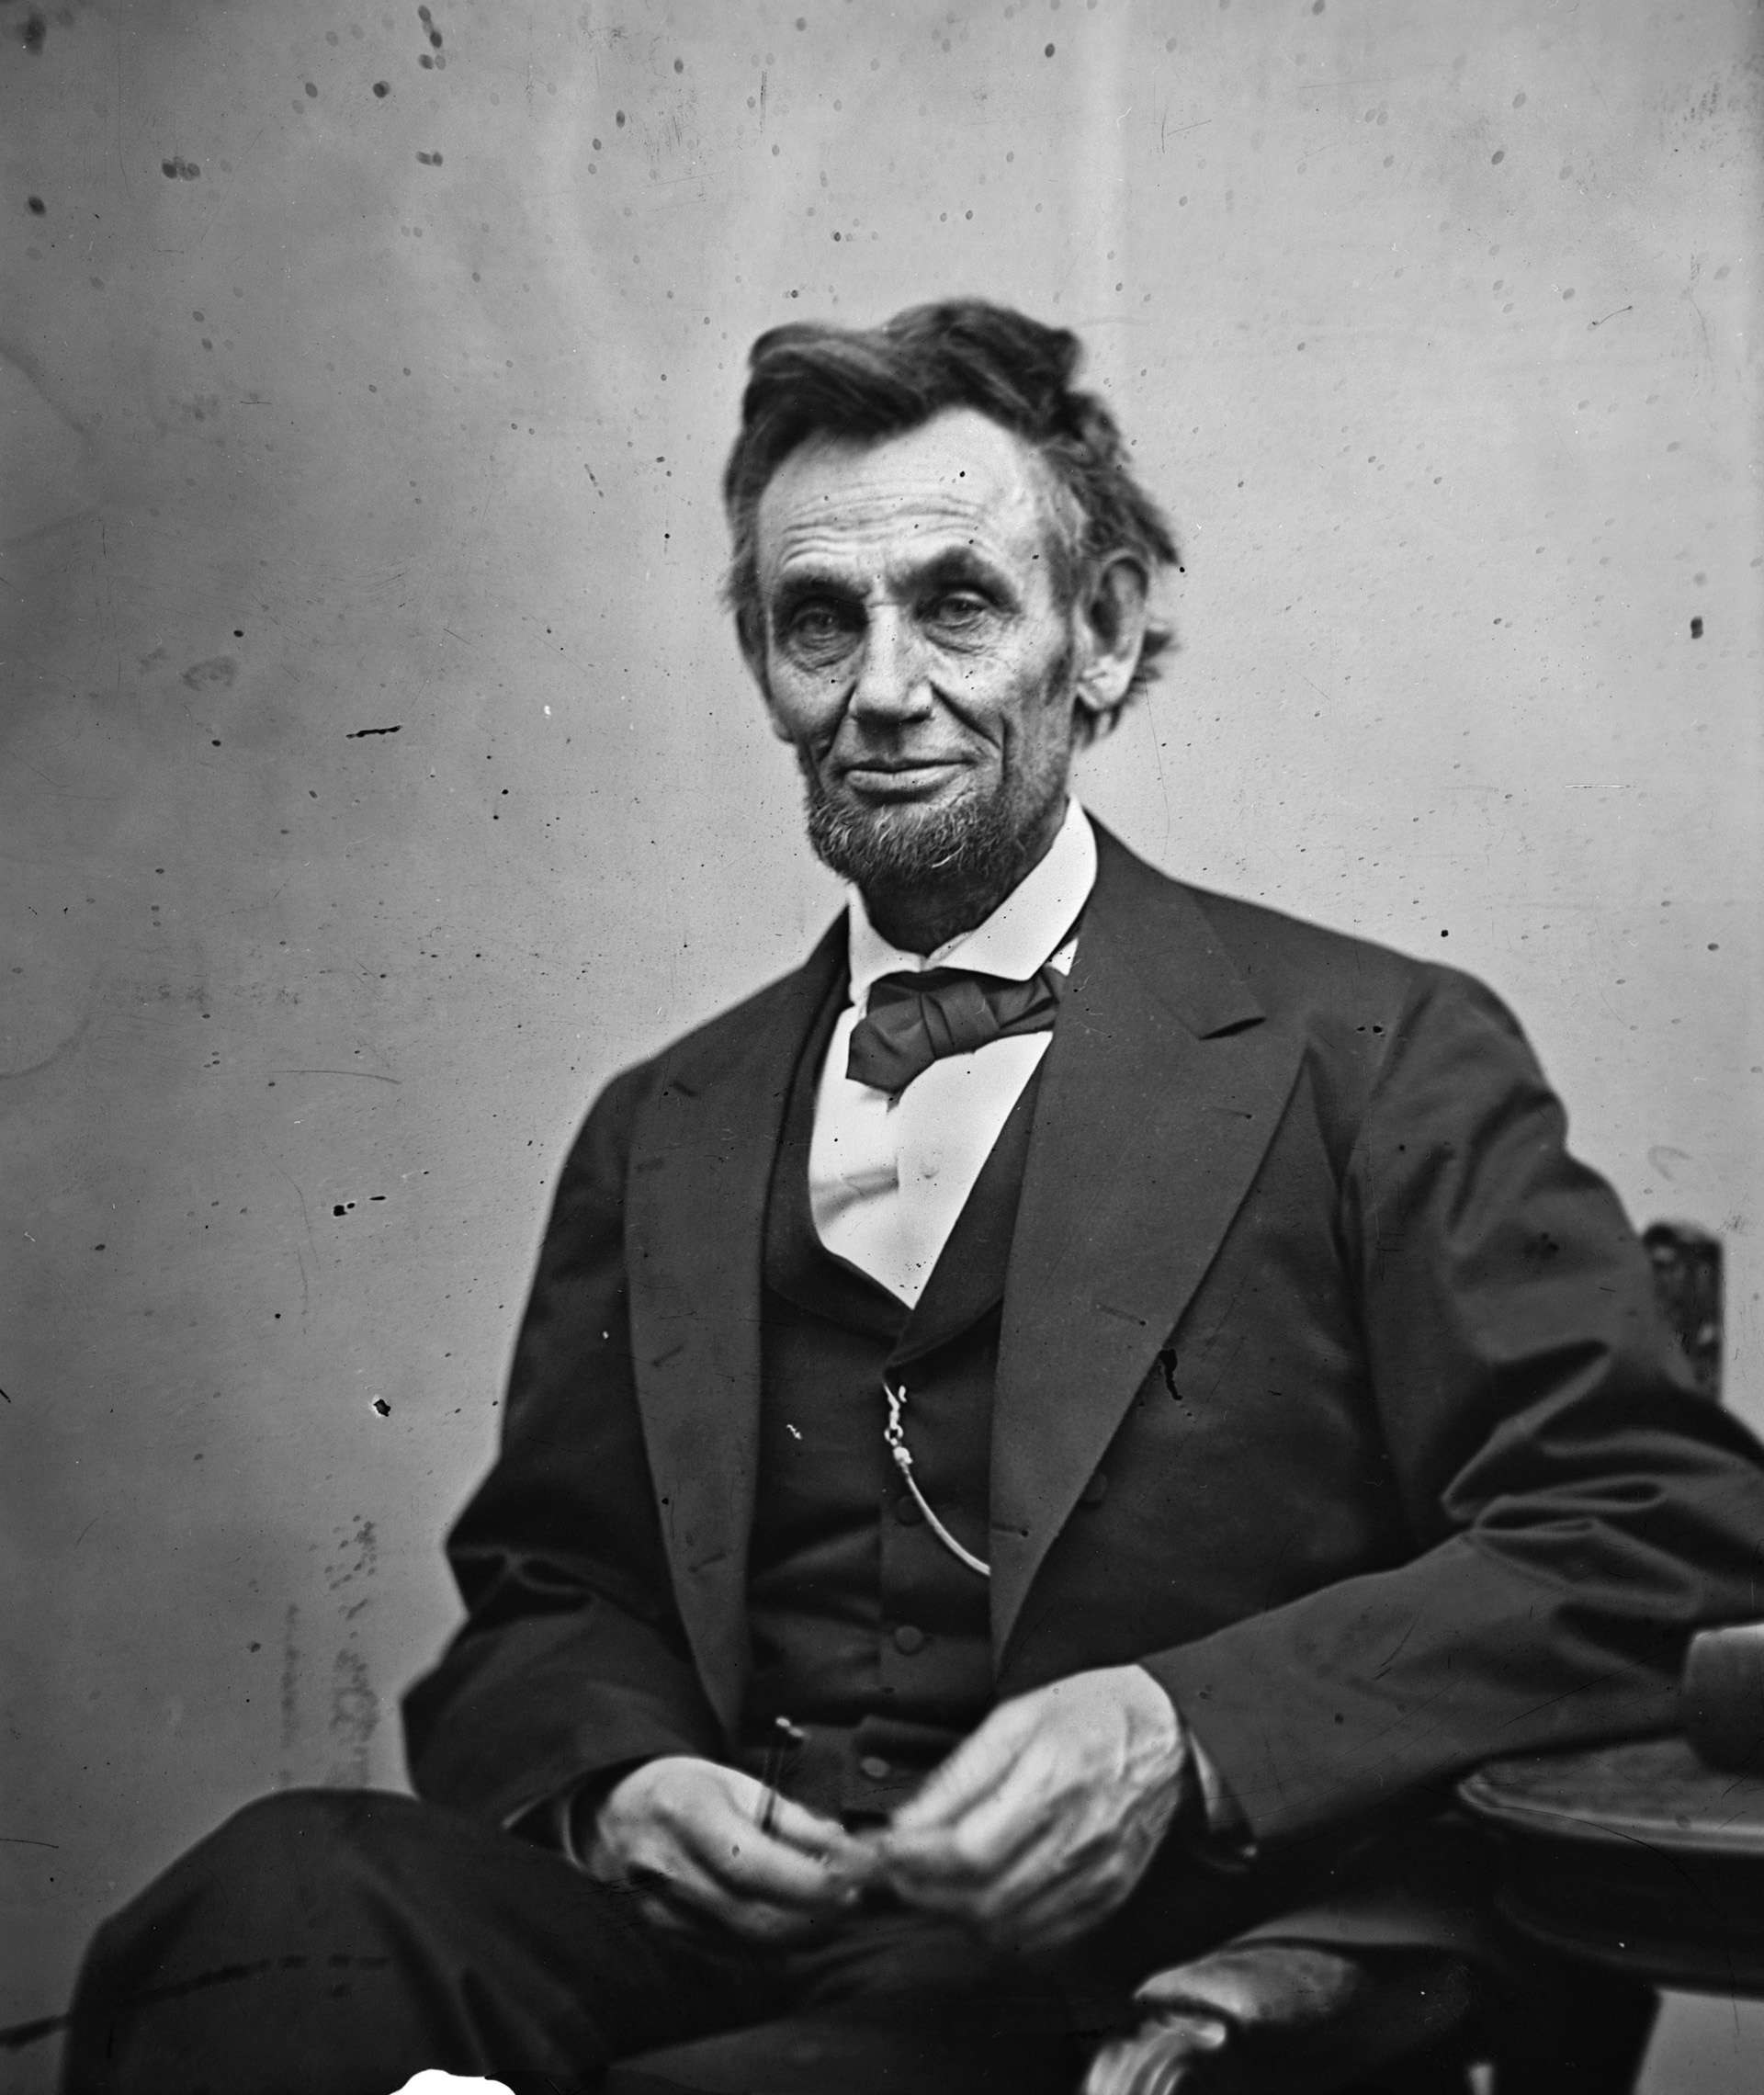 A visibly war-weary Abraham Lincoln posed for this photograph by Alexander Gardner on February 5, 1865. Two months later the president was assassinated.